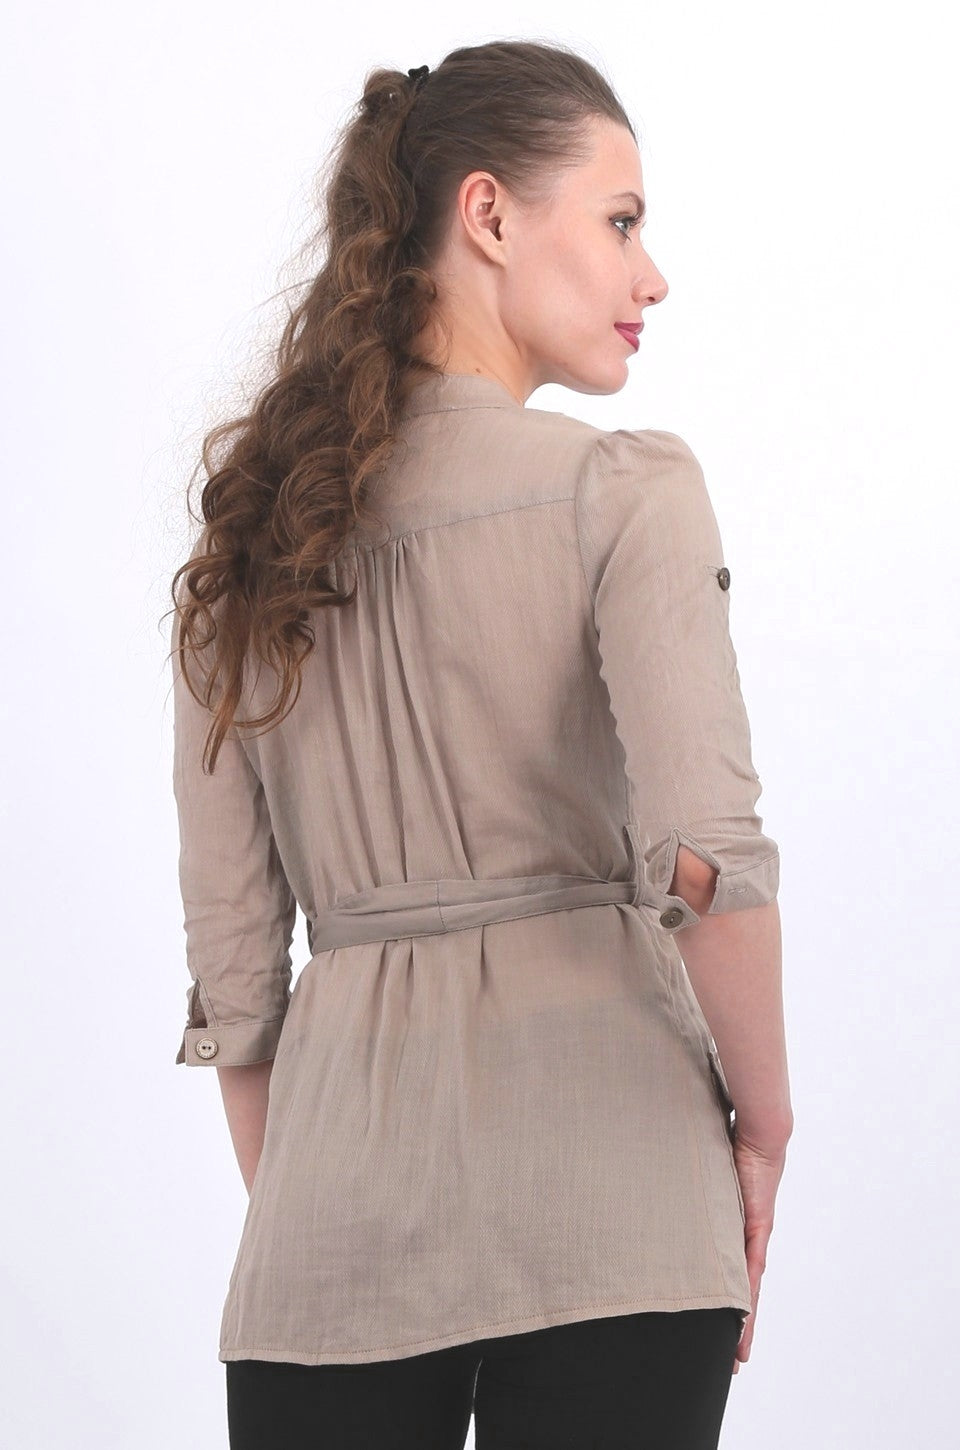 Valeria long shirt in taupe